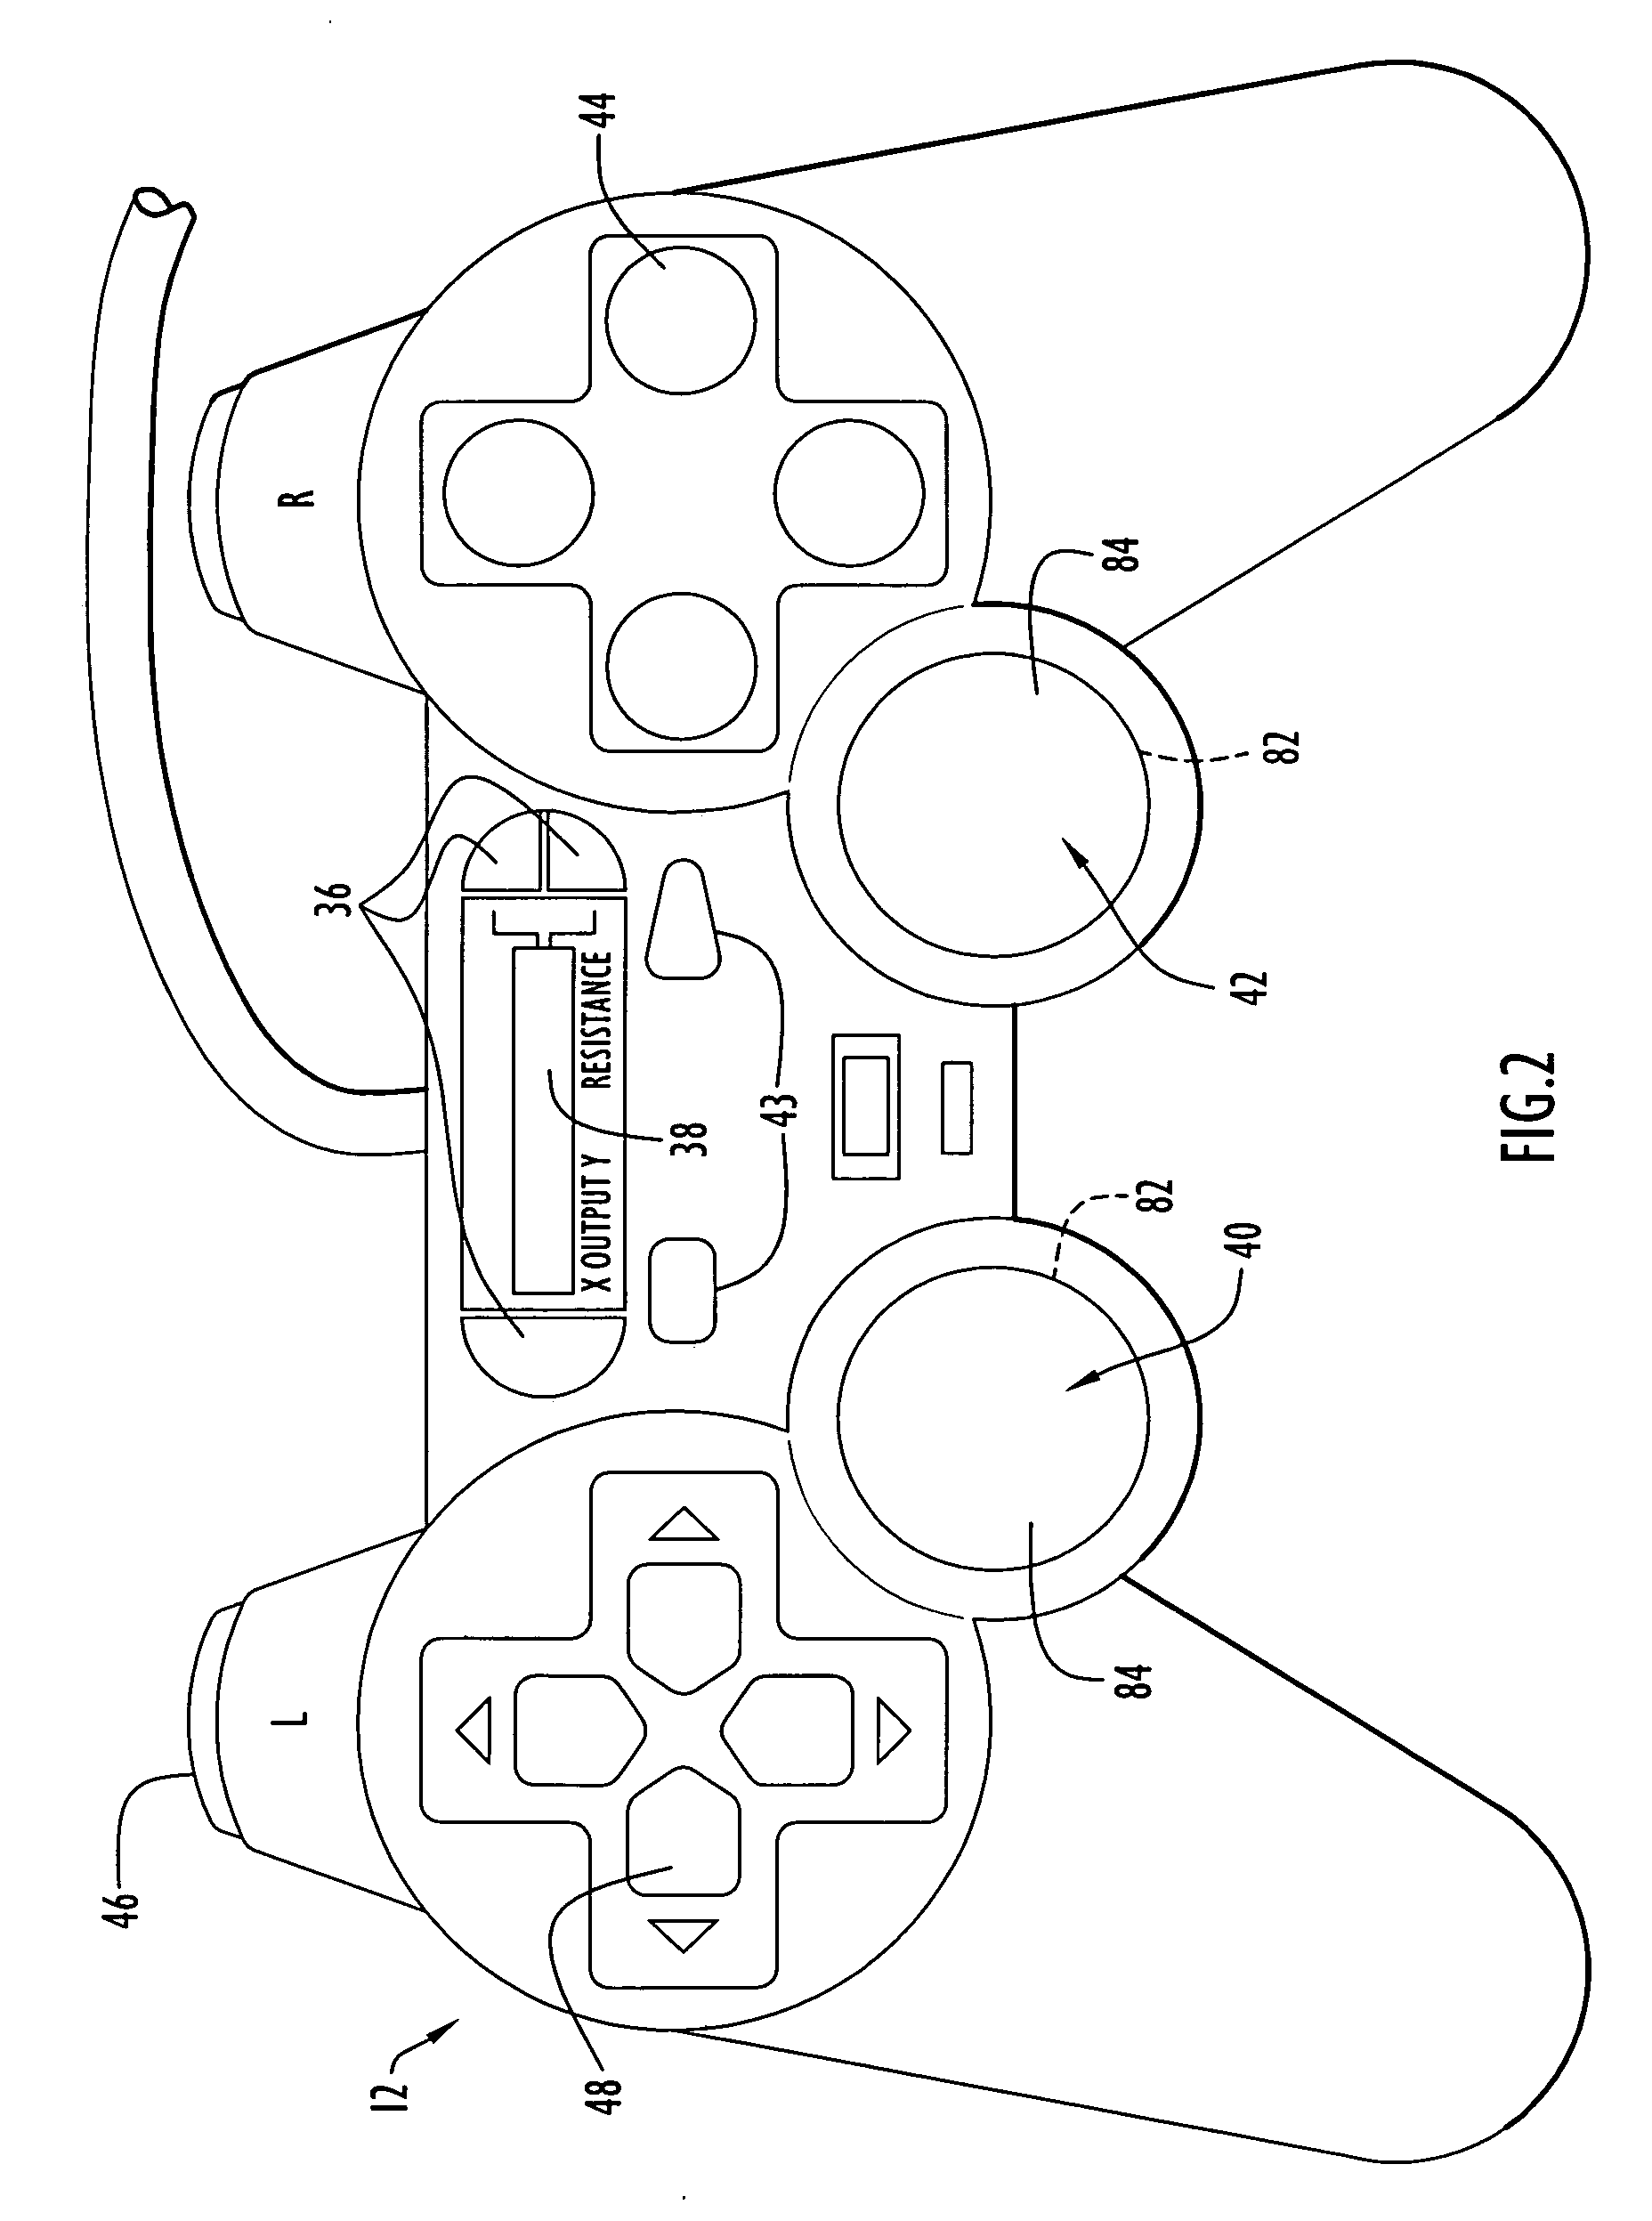 Game controller with force sensing input devices and method of measuring applied forces to game controller input devices to interact with a gaming application